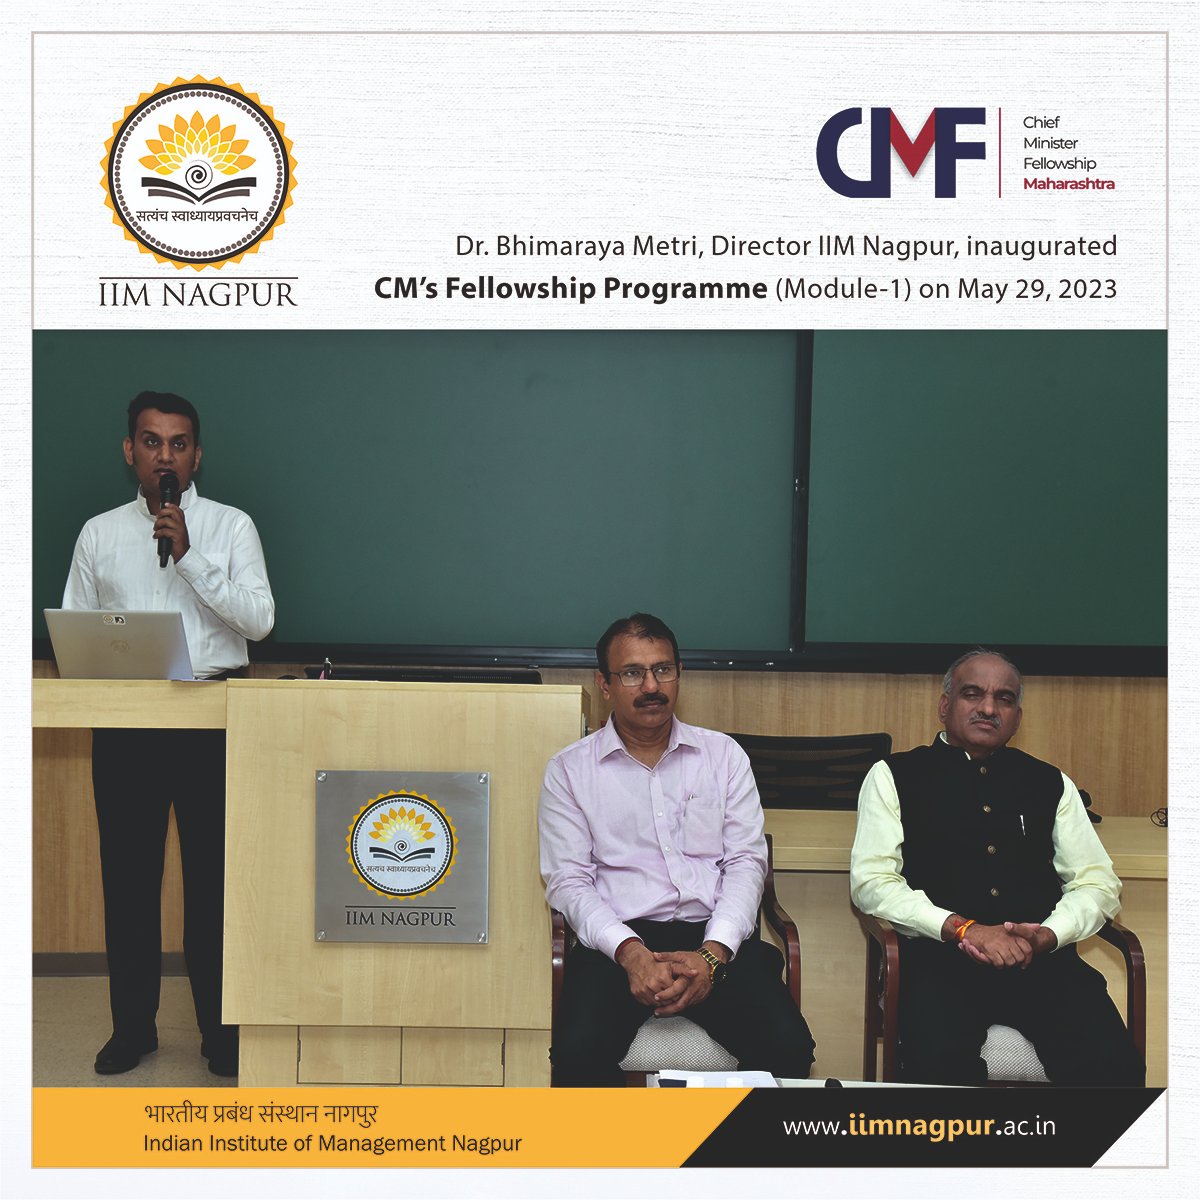 IIM Nagpur is thrilled to announce the inauguration of the first module of the Chief Minister's Fellowship (CMF) Programme!

#IIMatOrigiN #IIMNagpur #MBALife #LifeatIIMN